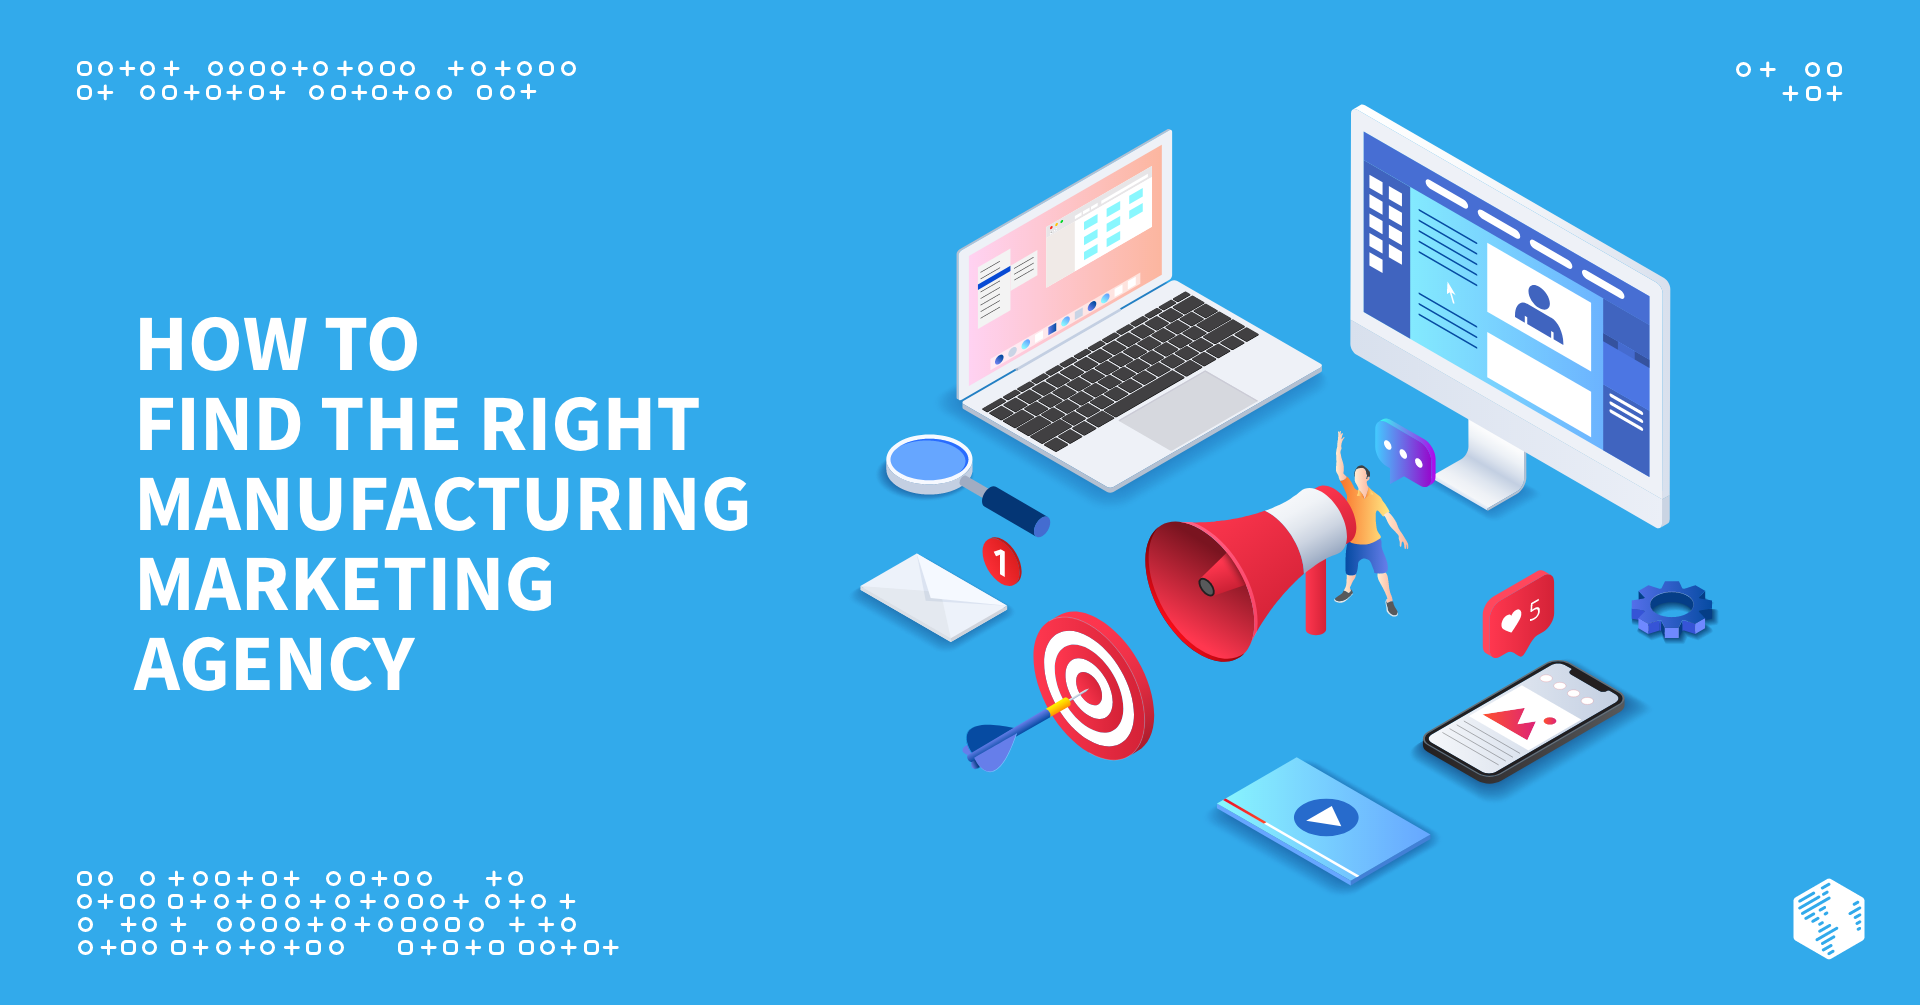 How to Find the Right Manufacturing Marketing Agency